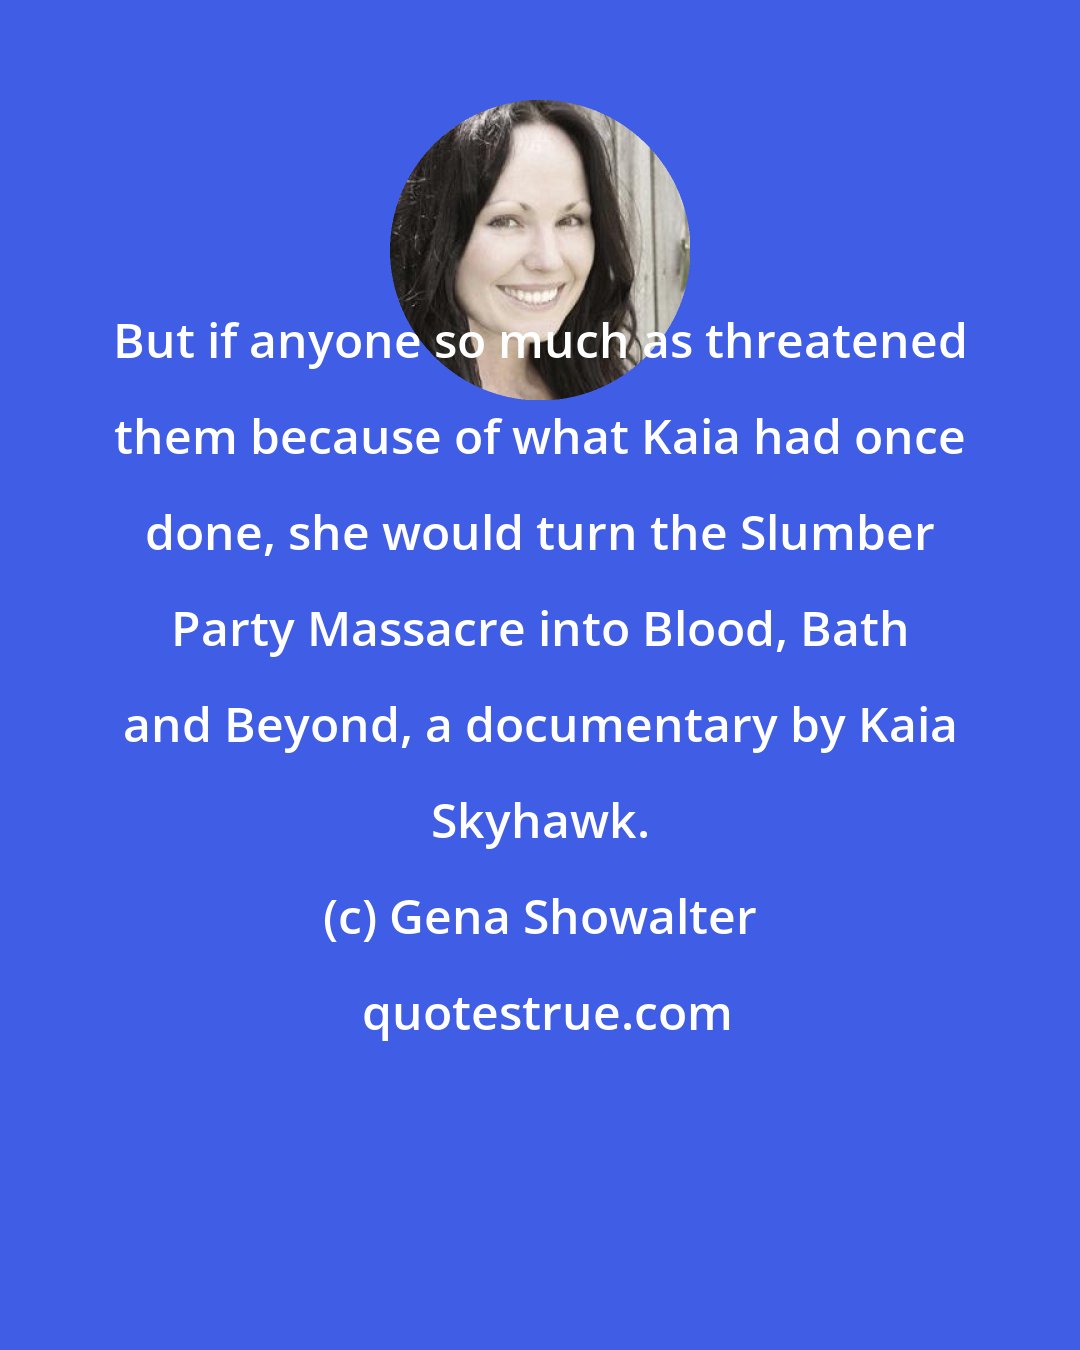 Gena Showalter: But if anyone so much as threatened them because of what Kaia had once done, she would turn the Slumber Party Massacre into Blood, Bath and Beyond, a documentary by Kaia Skyhawk.